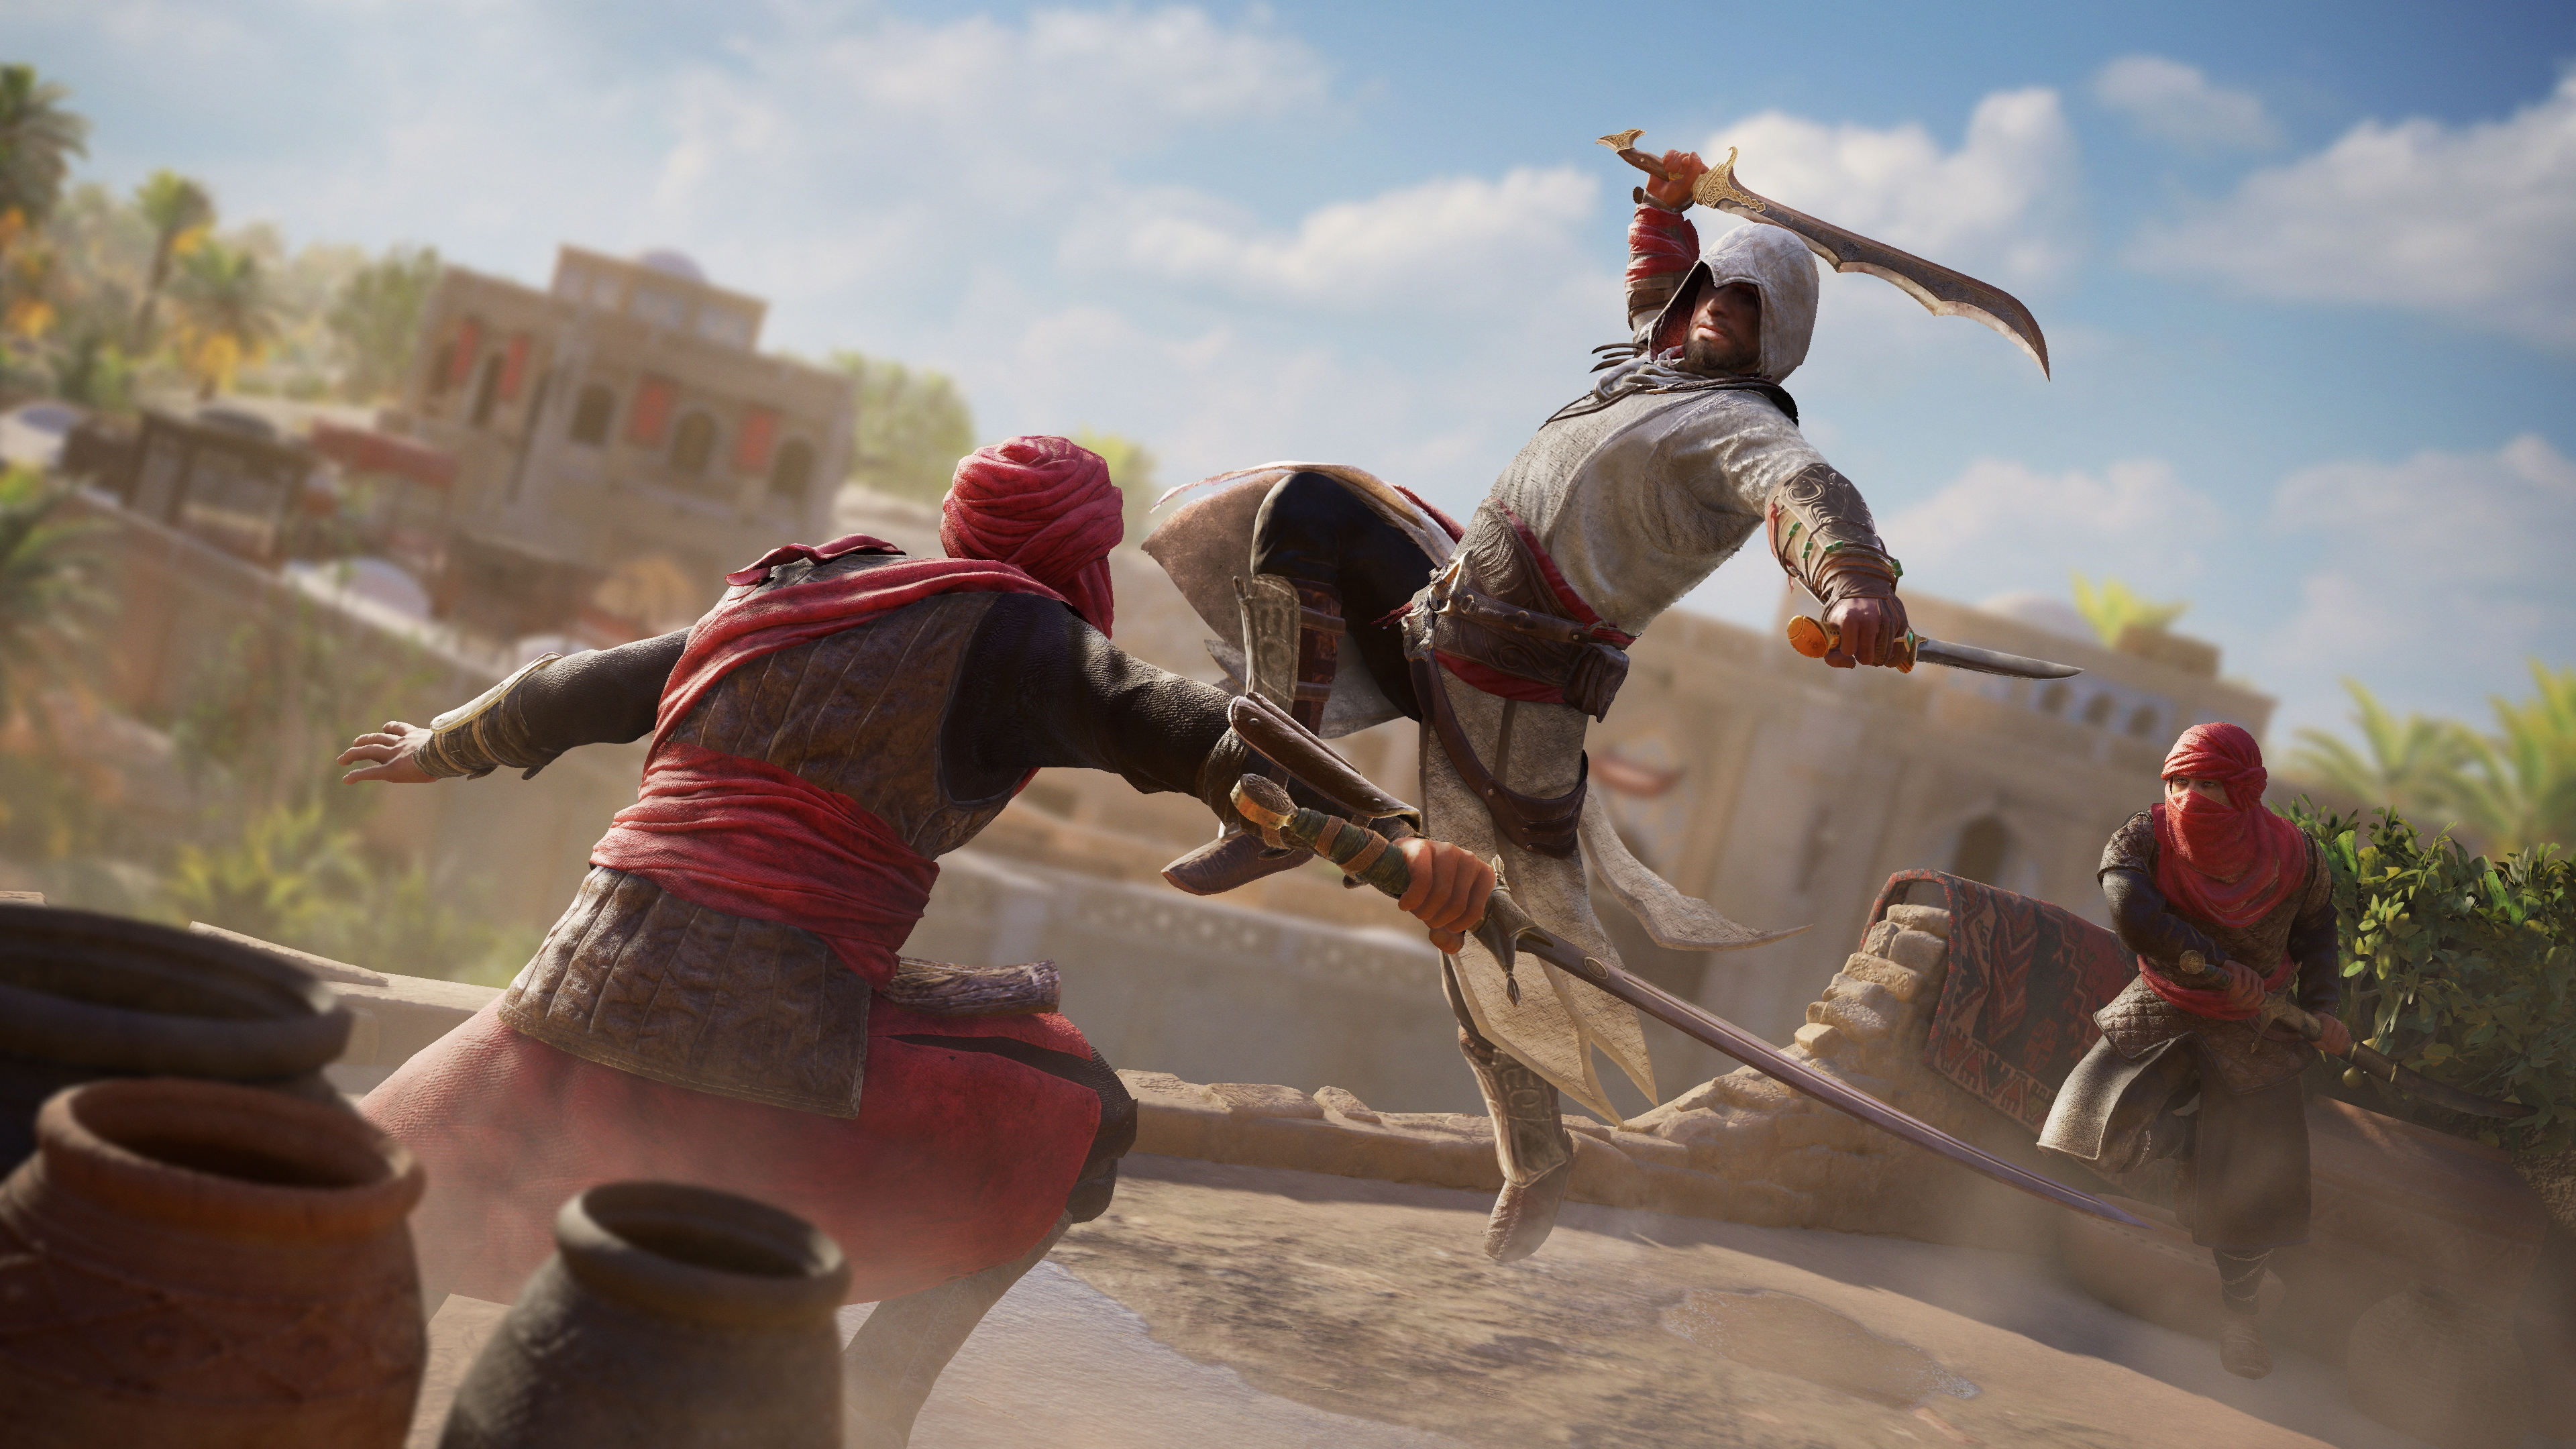 Assassin's Creed Mirage gets its first fix - IG News